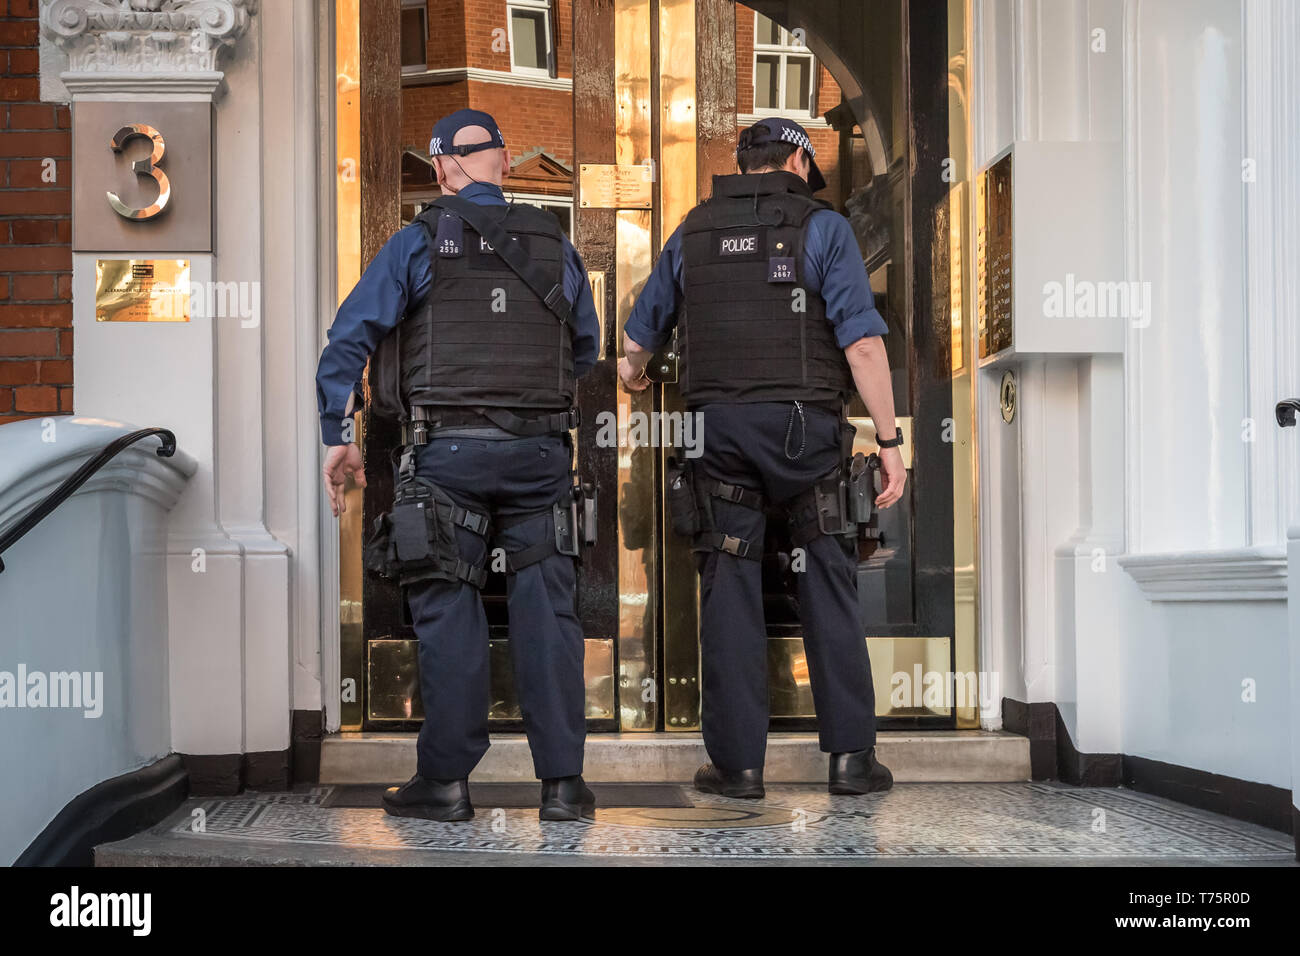 Met police are seen entering the Ecuadorian Embassy in Knightsbridge on the day of Julian Assange's forced eviction and arrest. London, UK. Stock Photo